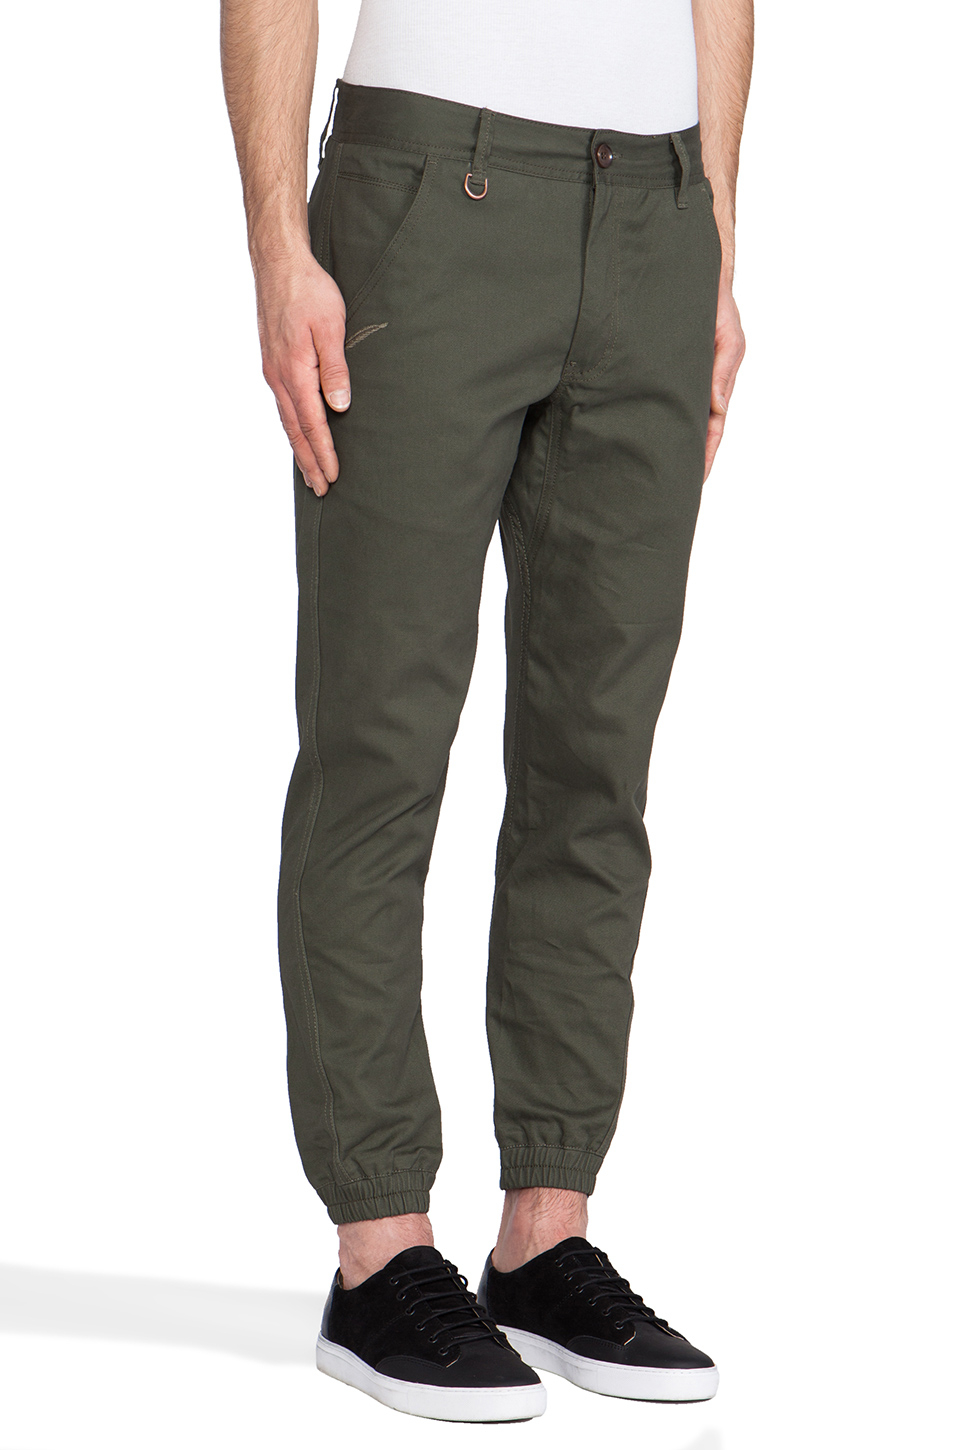 Timberland Jogger in Olive (Green) for Men - Lyst